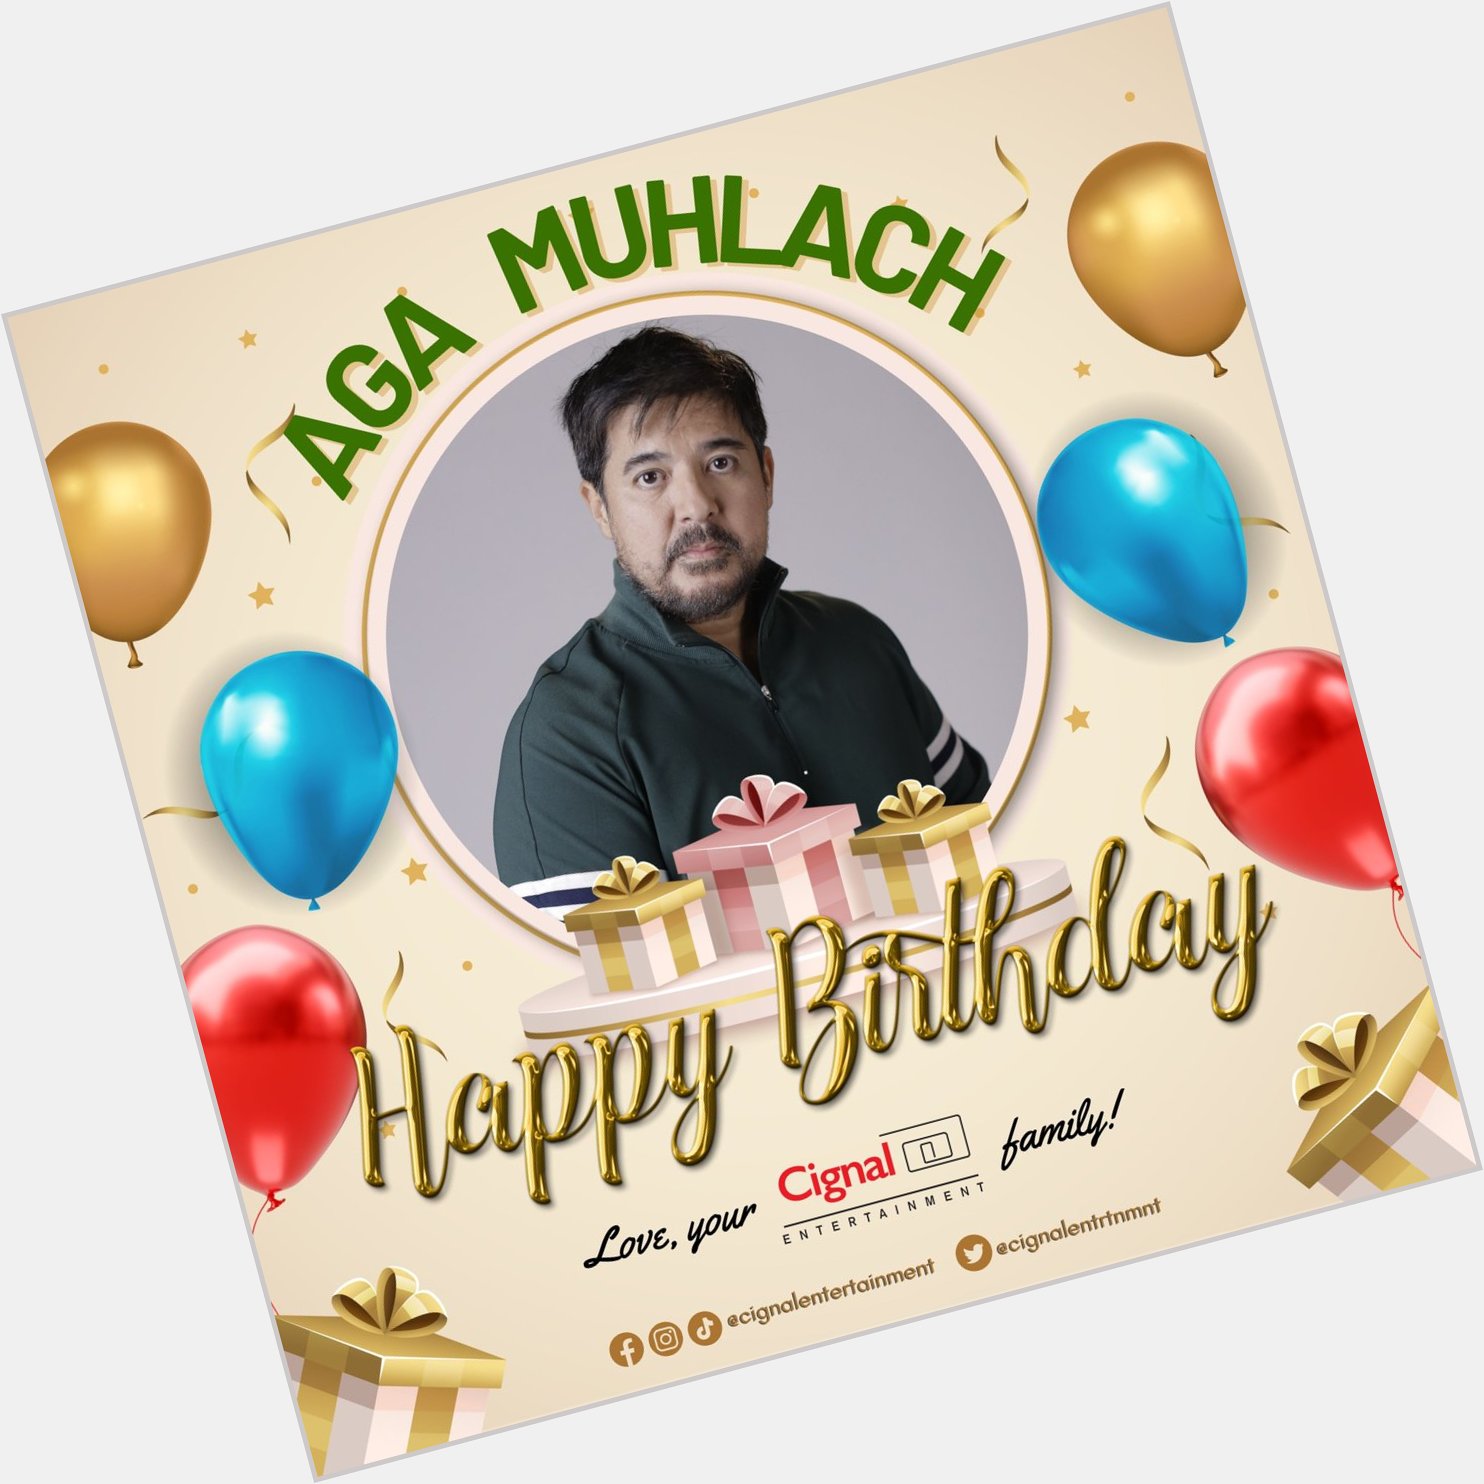 Happy birthday, Mr. Aga Muhlach! Your Cignal Entertainment family wishes you all the best!   